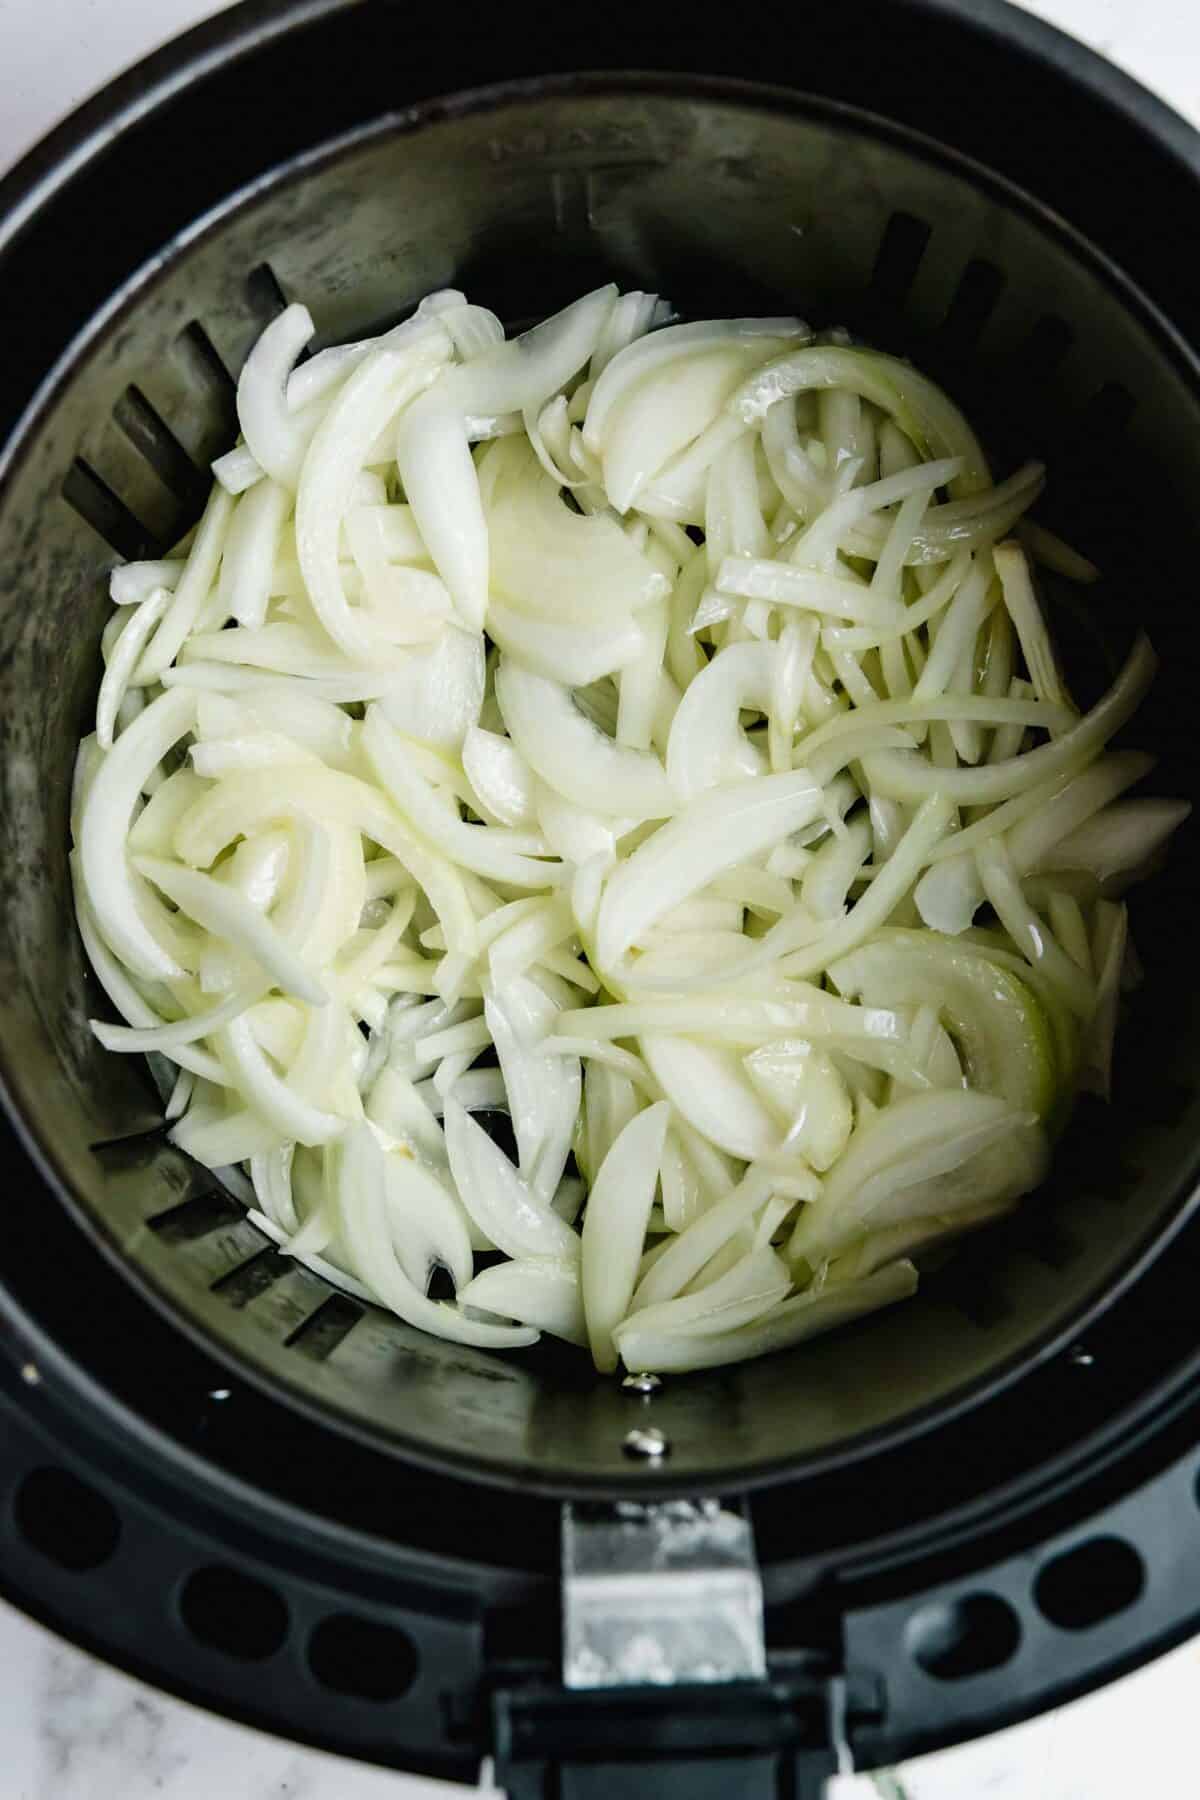 Raw onions in the basket of an air fryer.